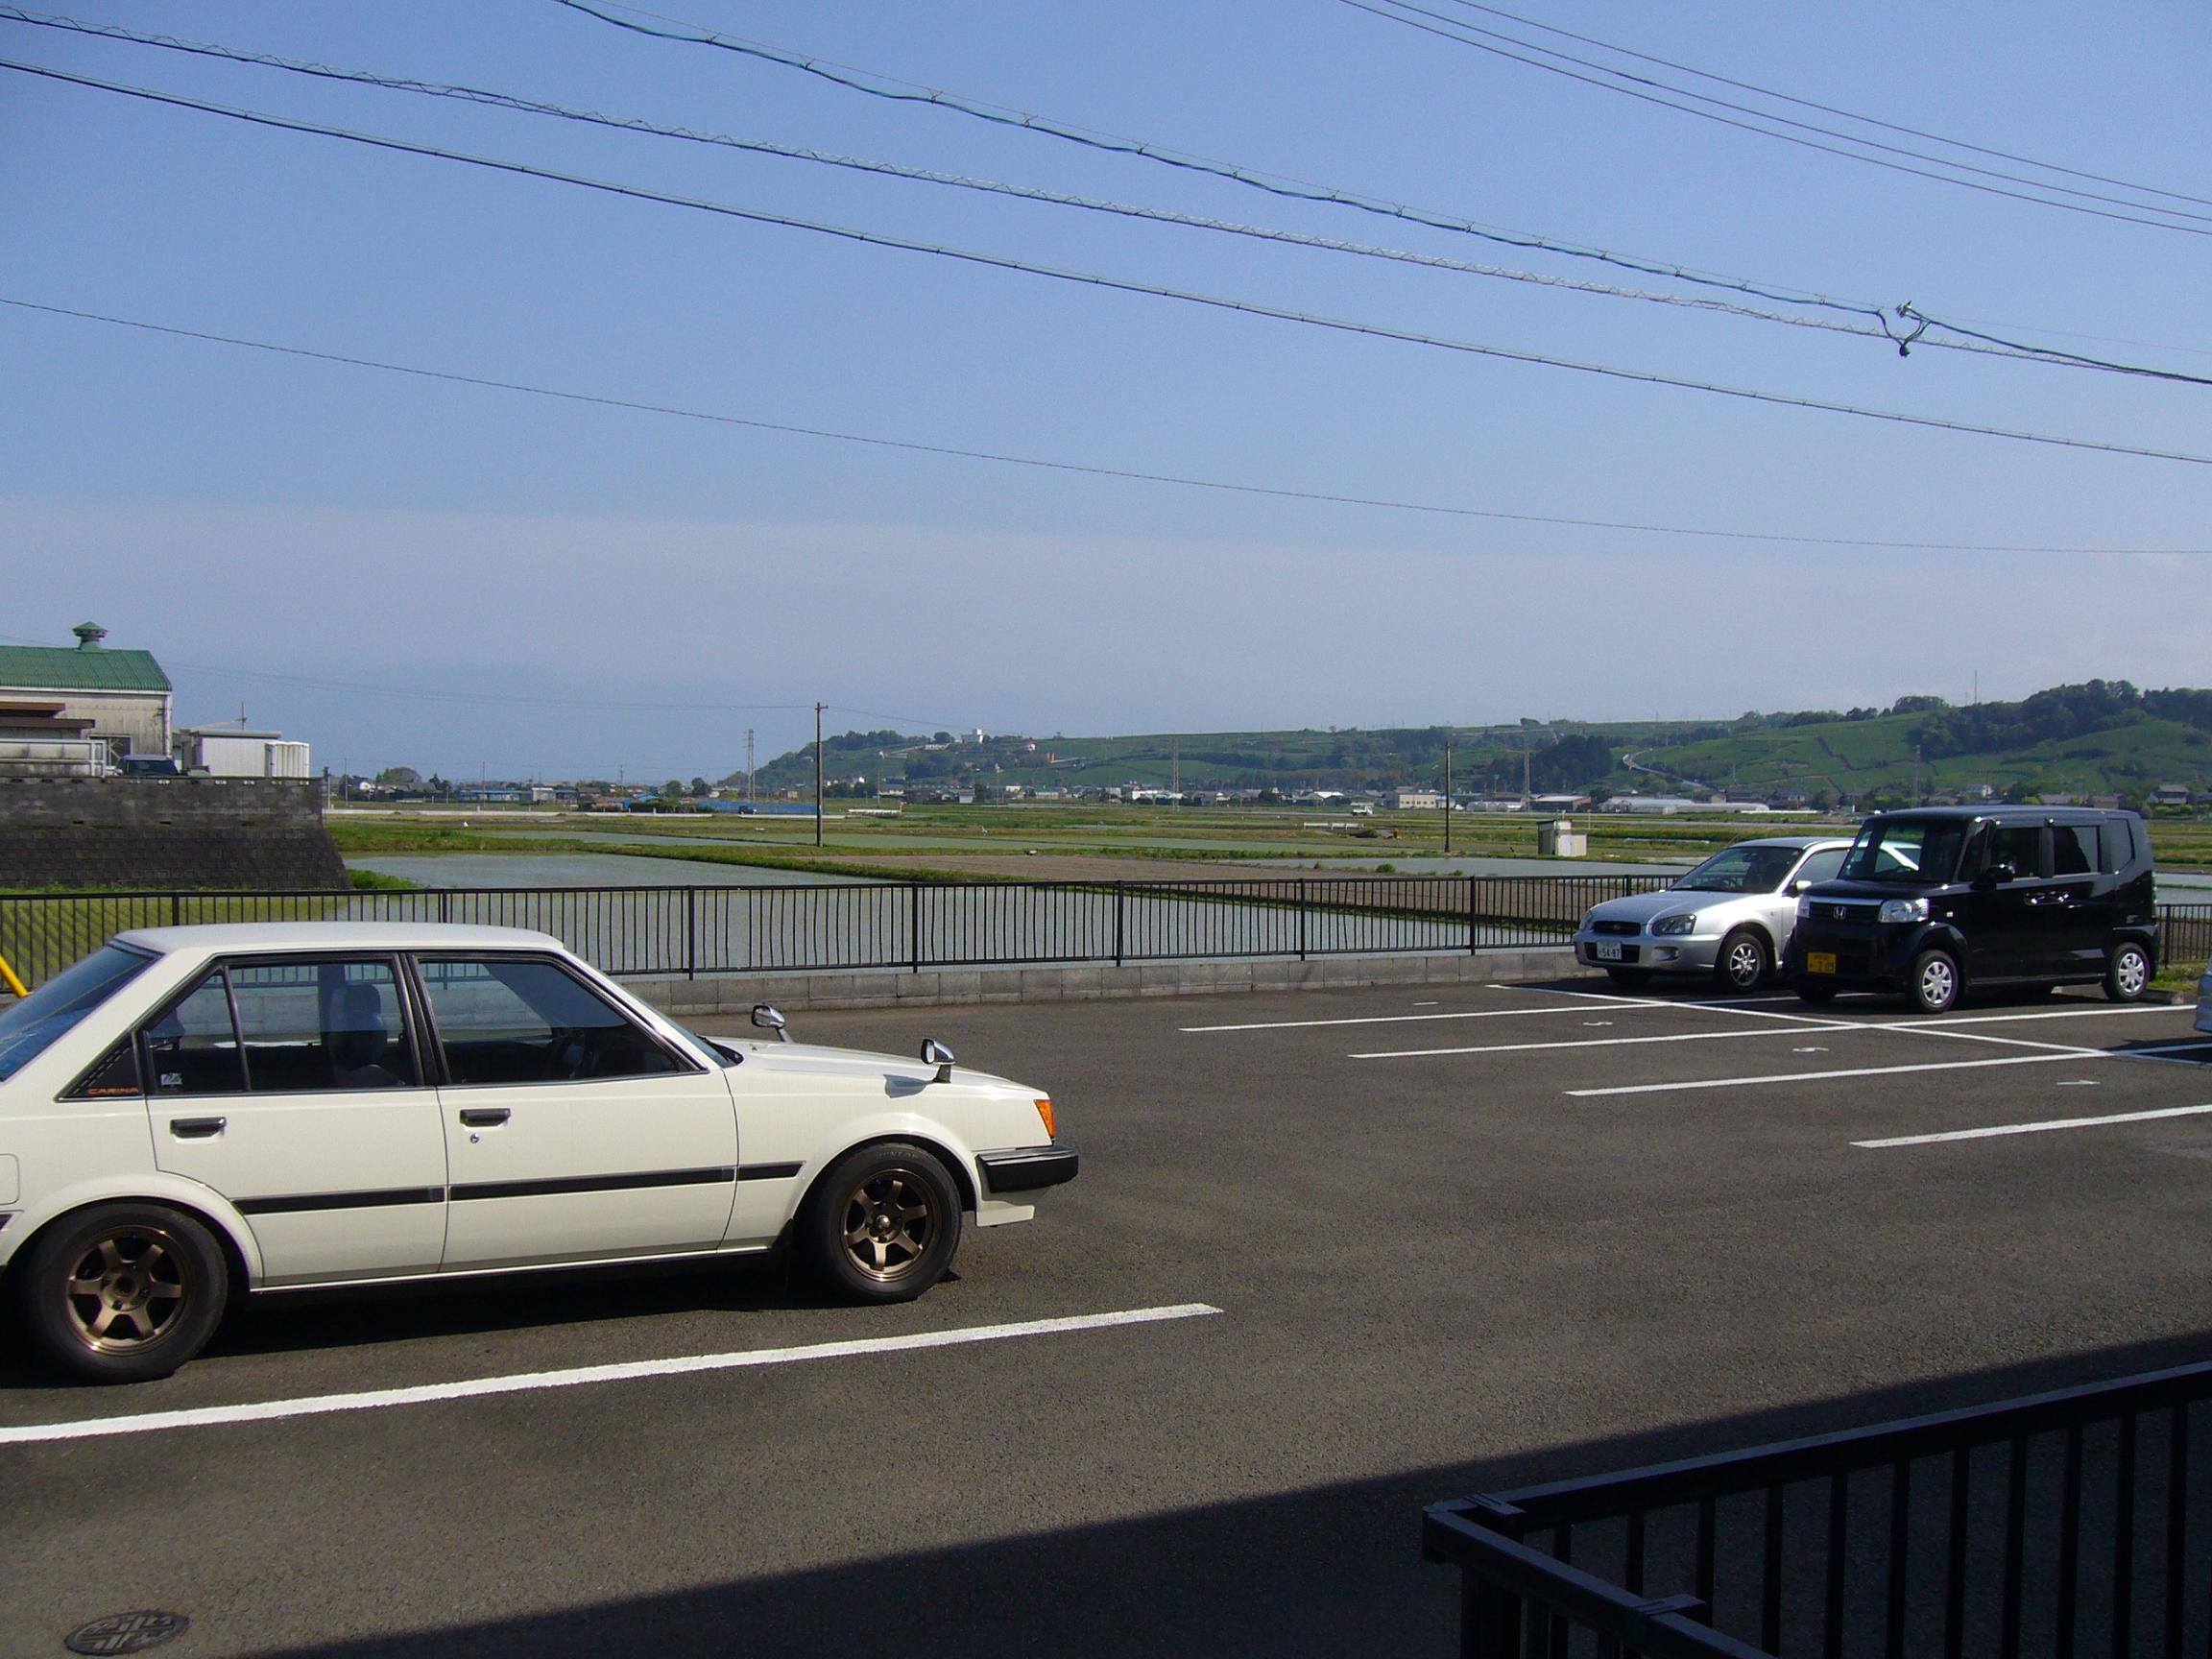 Parking lot. South Parking, Countryside Beyond that is followed by a rice field and field